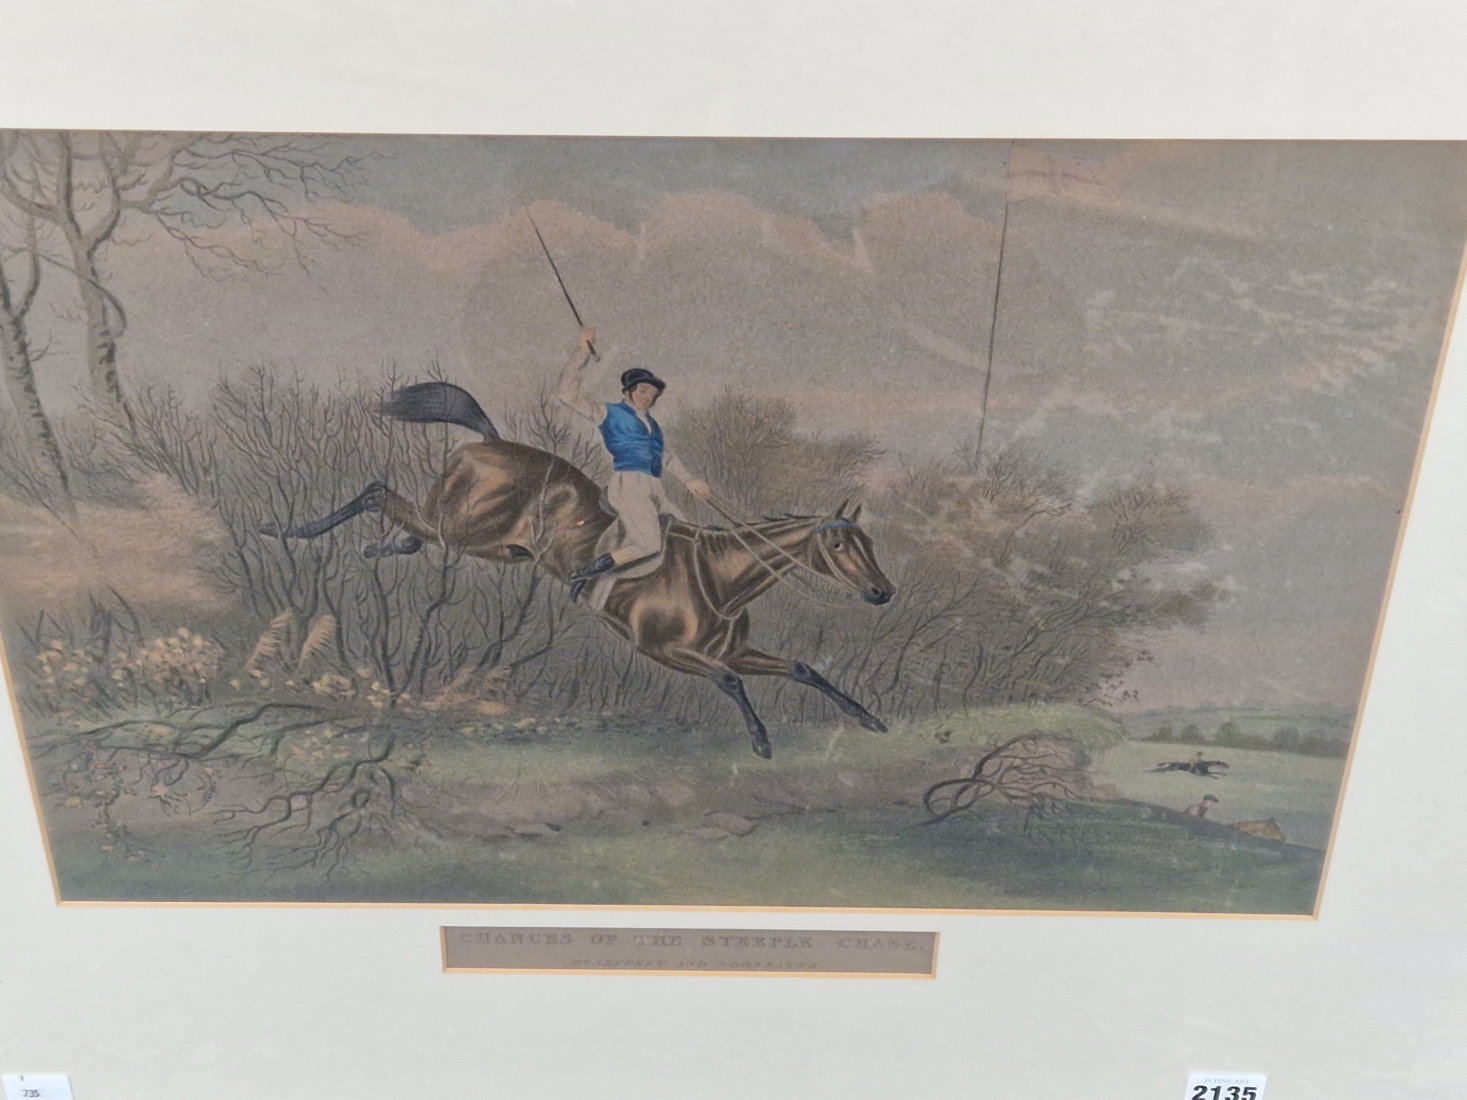 THREE ANTIQUE HAND COLOURED SPORTING PRINTS OF STEEPLE CHASE SCENES. 34 x 48cms, TOGETHER WITH A - Image 2 of 7